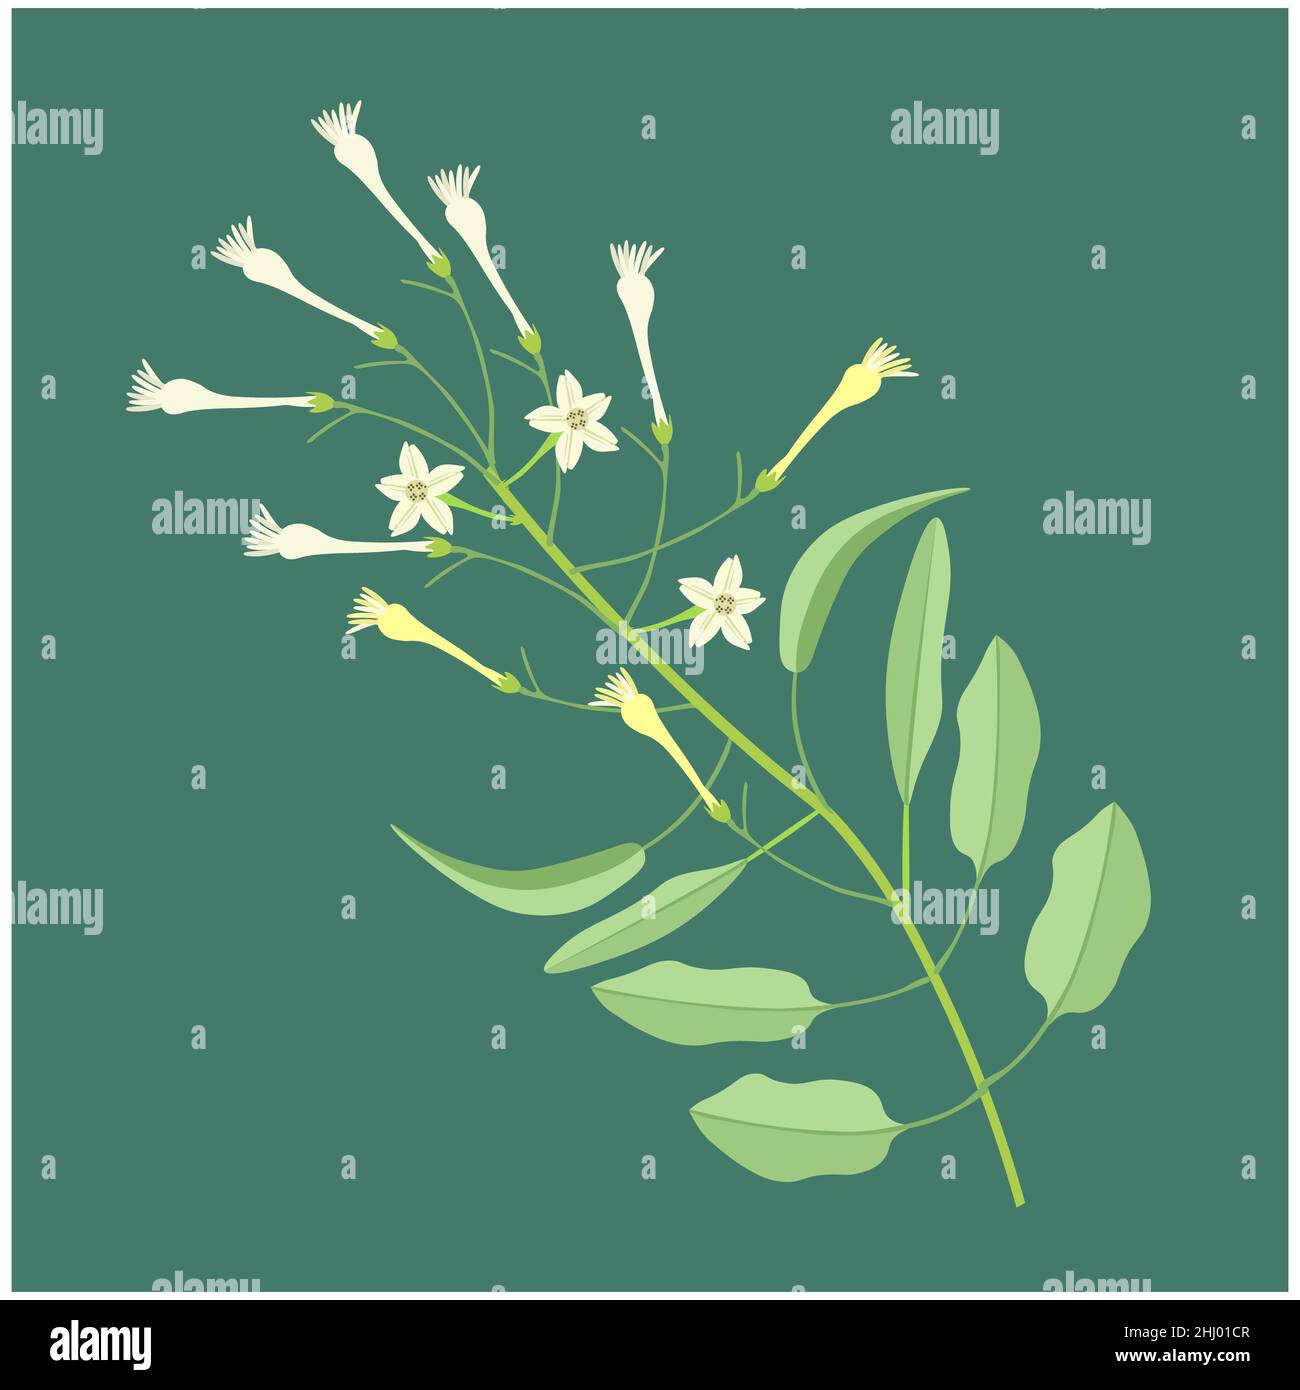 Beautiful Flower, Illustration of White Tuberose Flowers or Night Blooming Jasmine with Green Leaves. Stock Photo